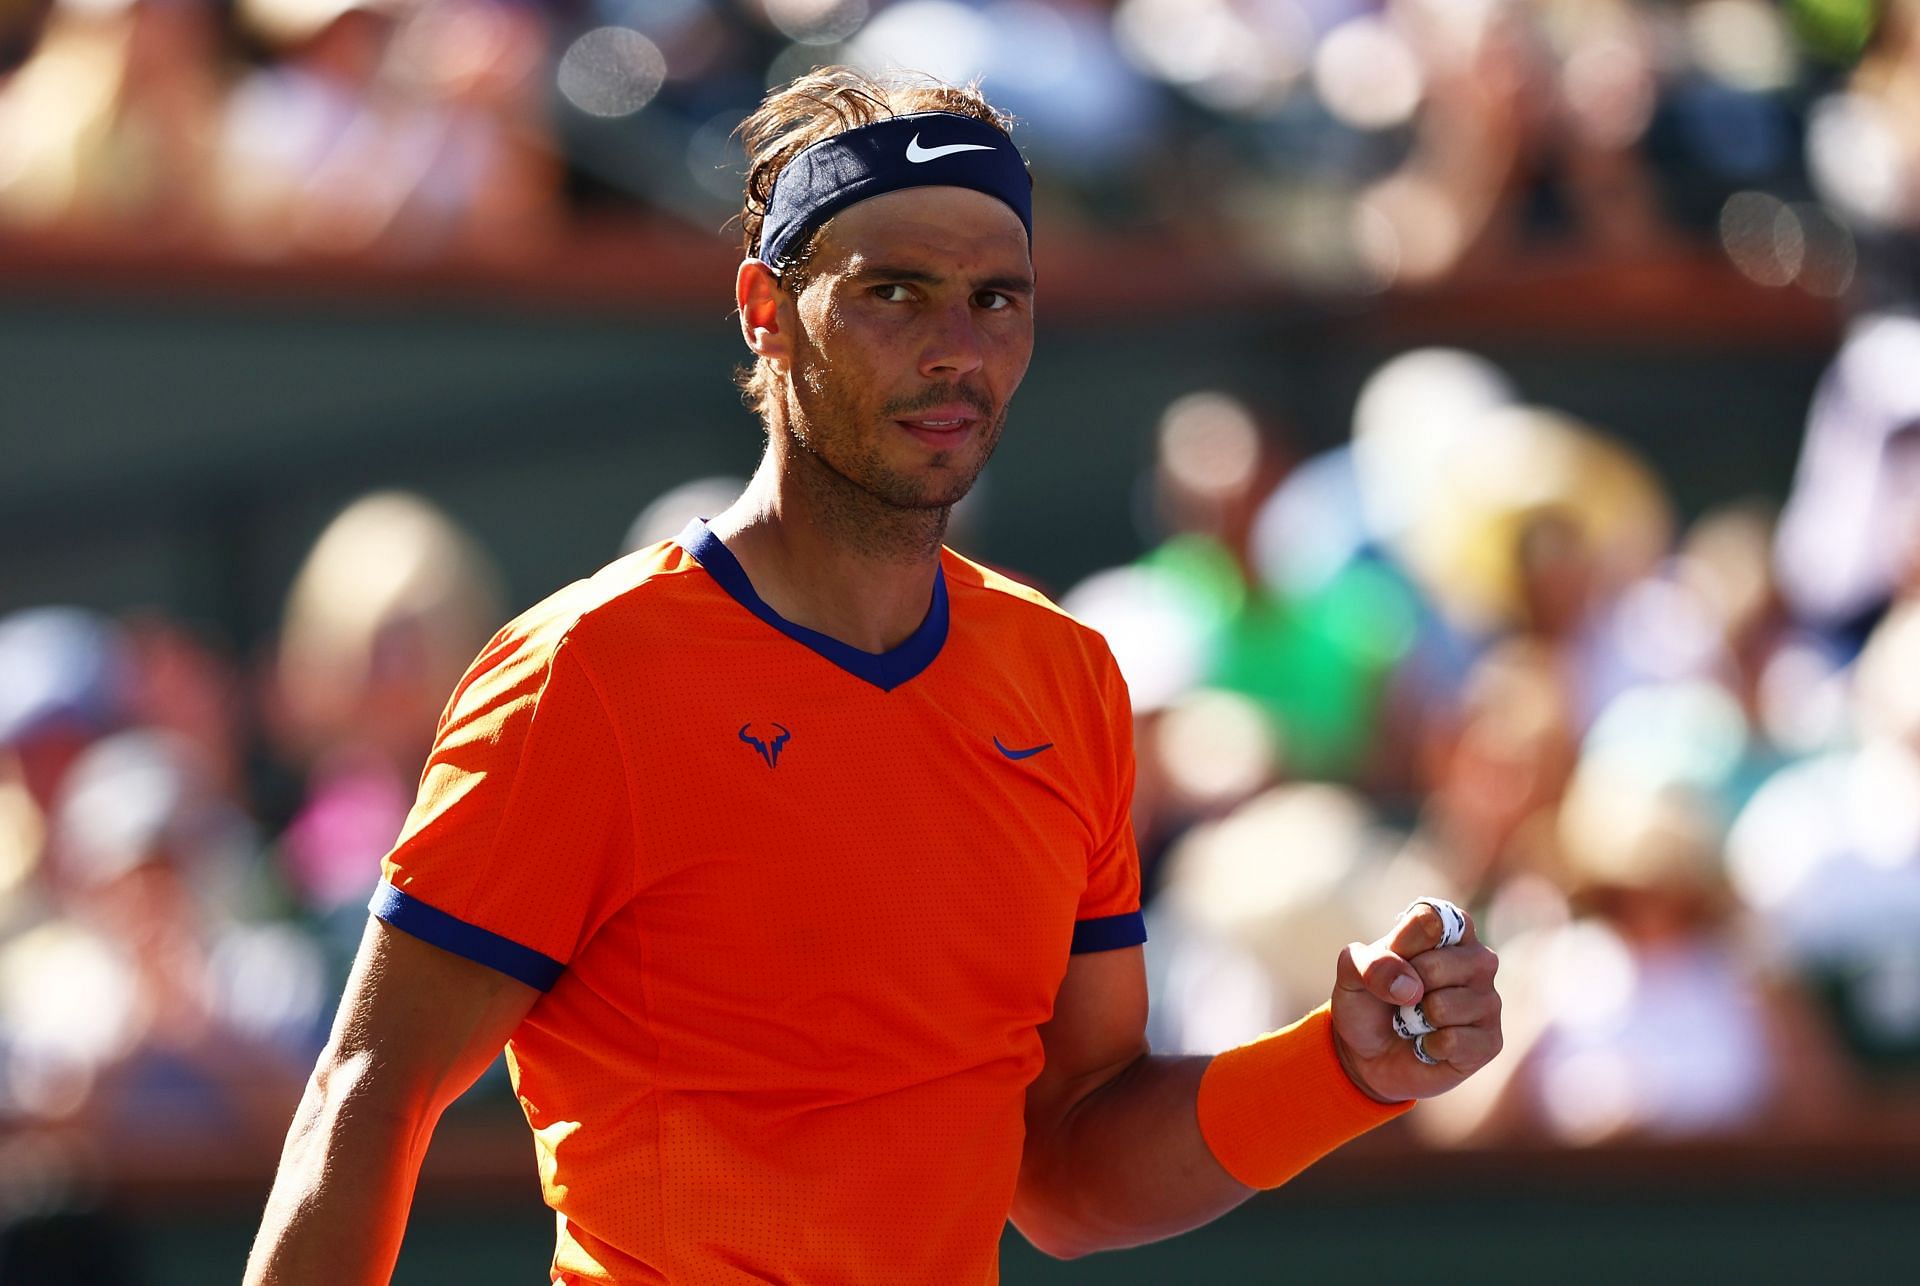 Rafael Nadal at the 2022 Indian Wells Open.